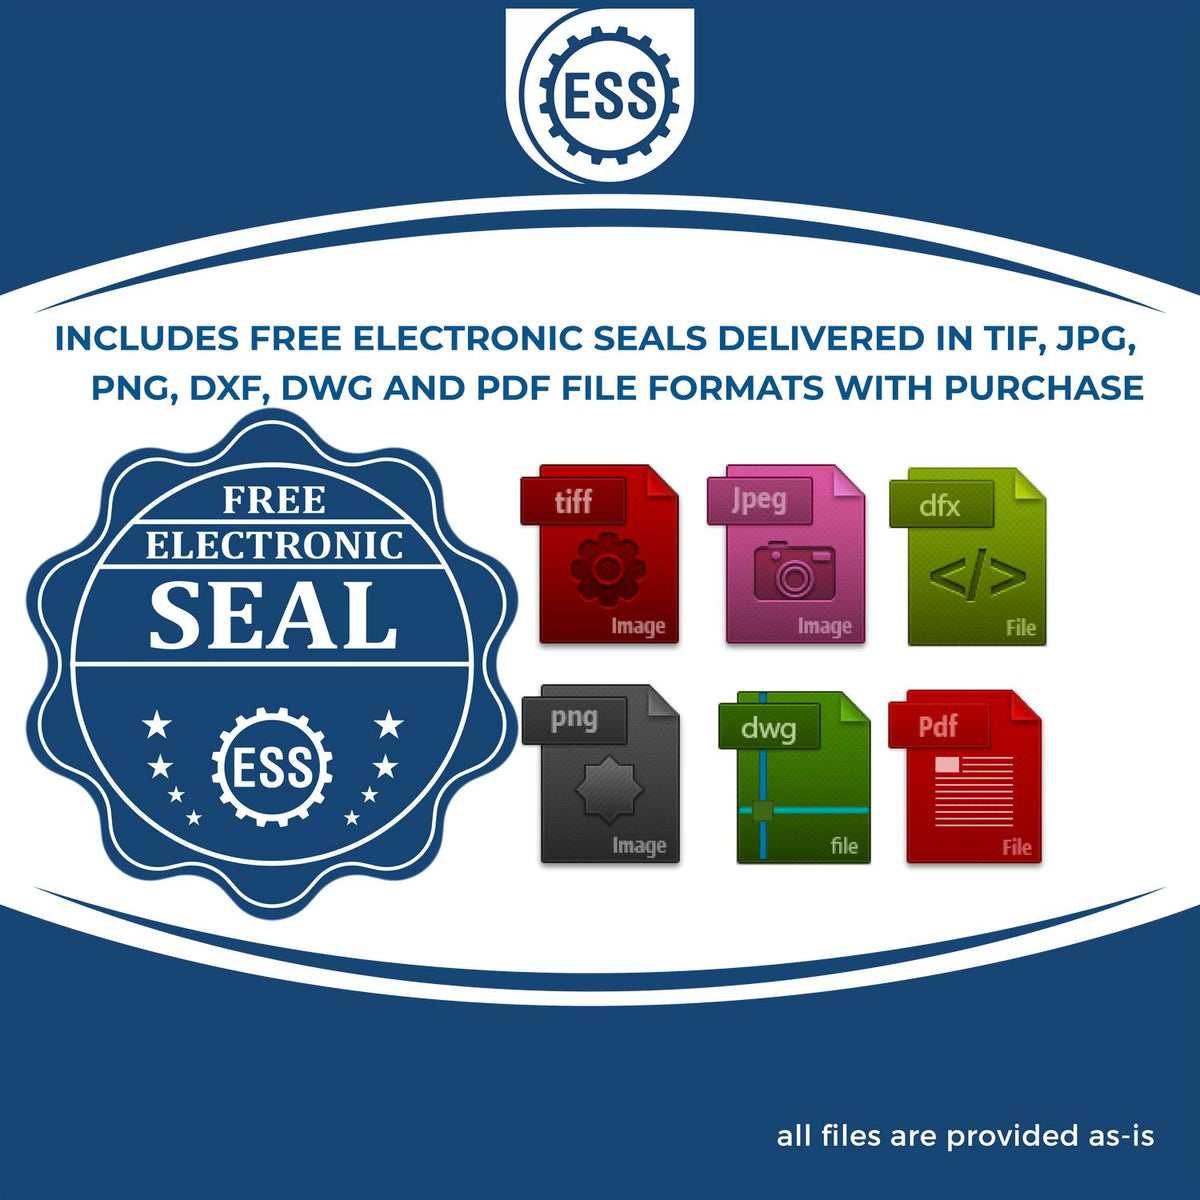 An infographic for the free electronic seal for the Gift Kansas Landscape Architect Seal illustrating the different file type icons such as DXF, DWG, TIF, JPG and PNG.